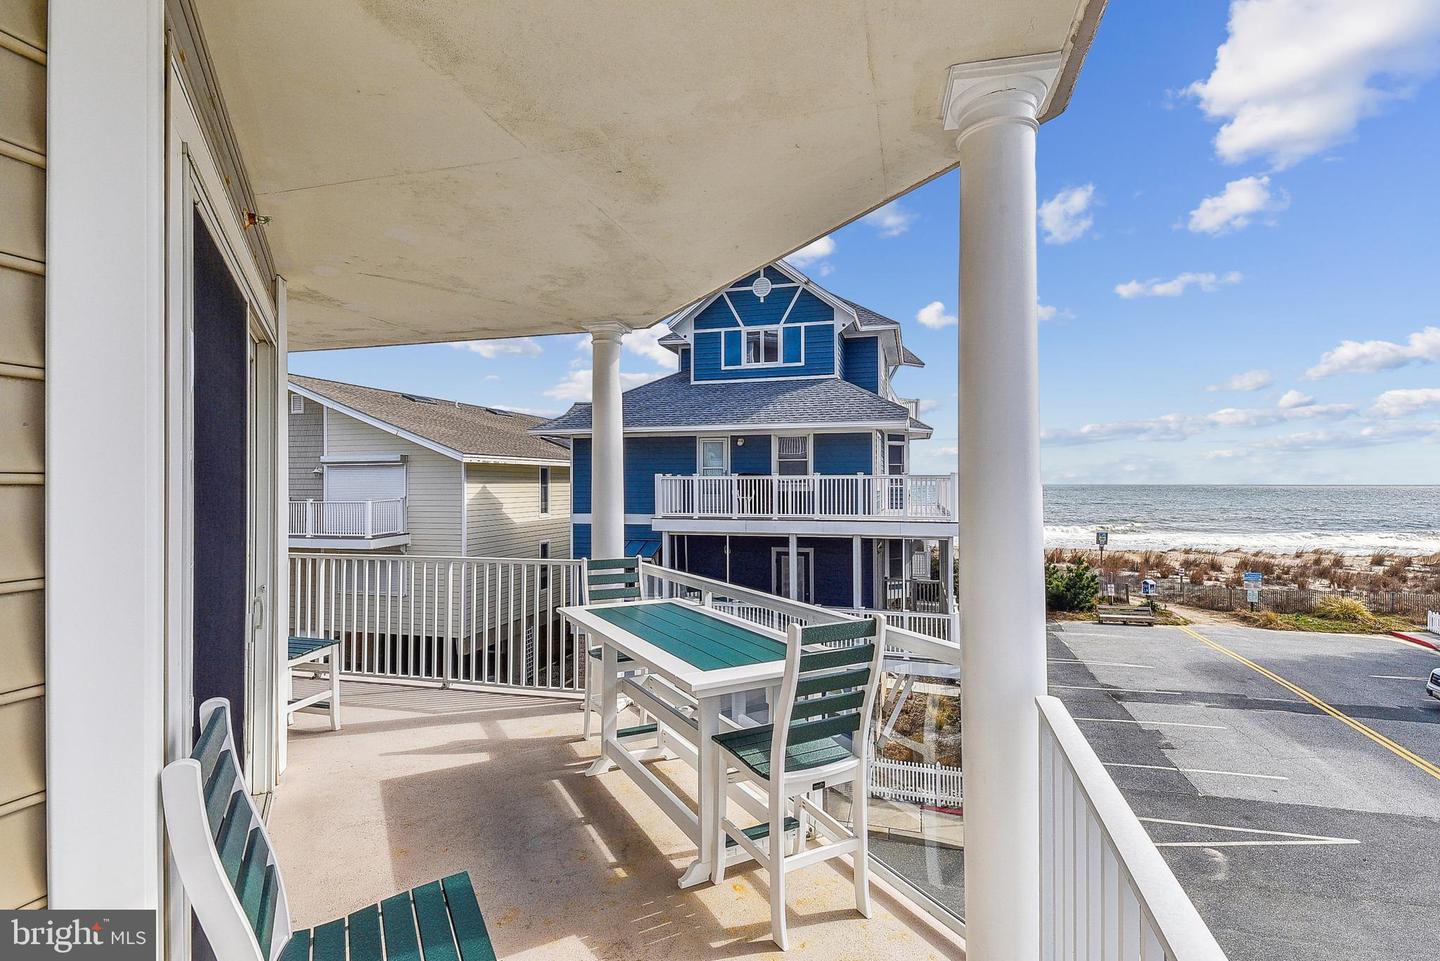 MDWO2019340-802918960510-2024-03-12-11-41-10 14301 Wight St #201 | Ocean City, MD Real Estate For Sale | MLS# Mdwo2019340  - 1st Choice Properties